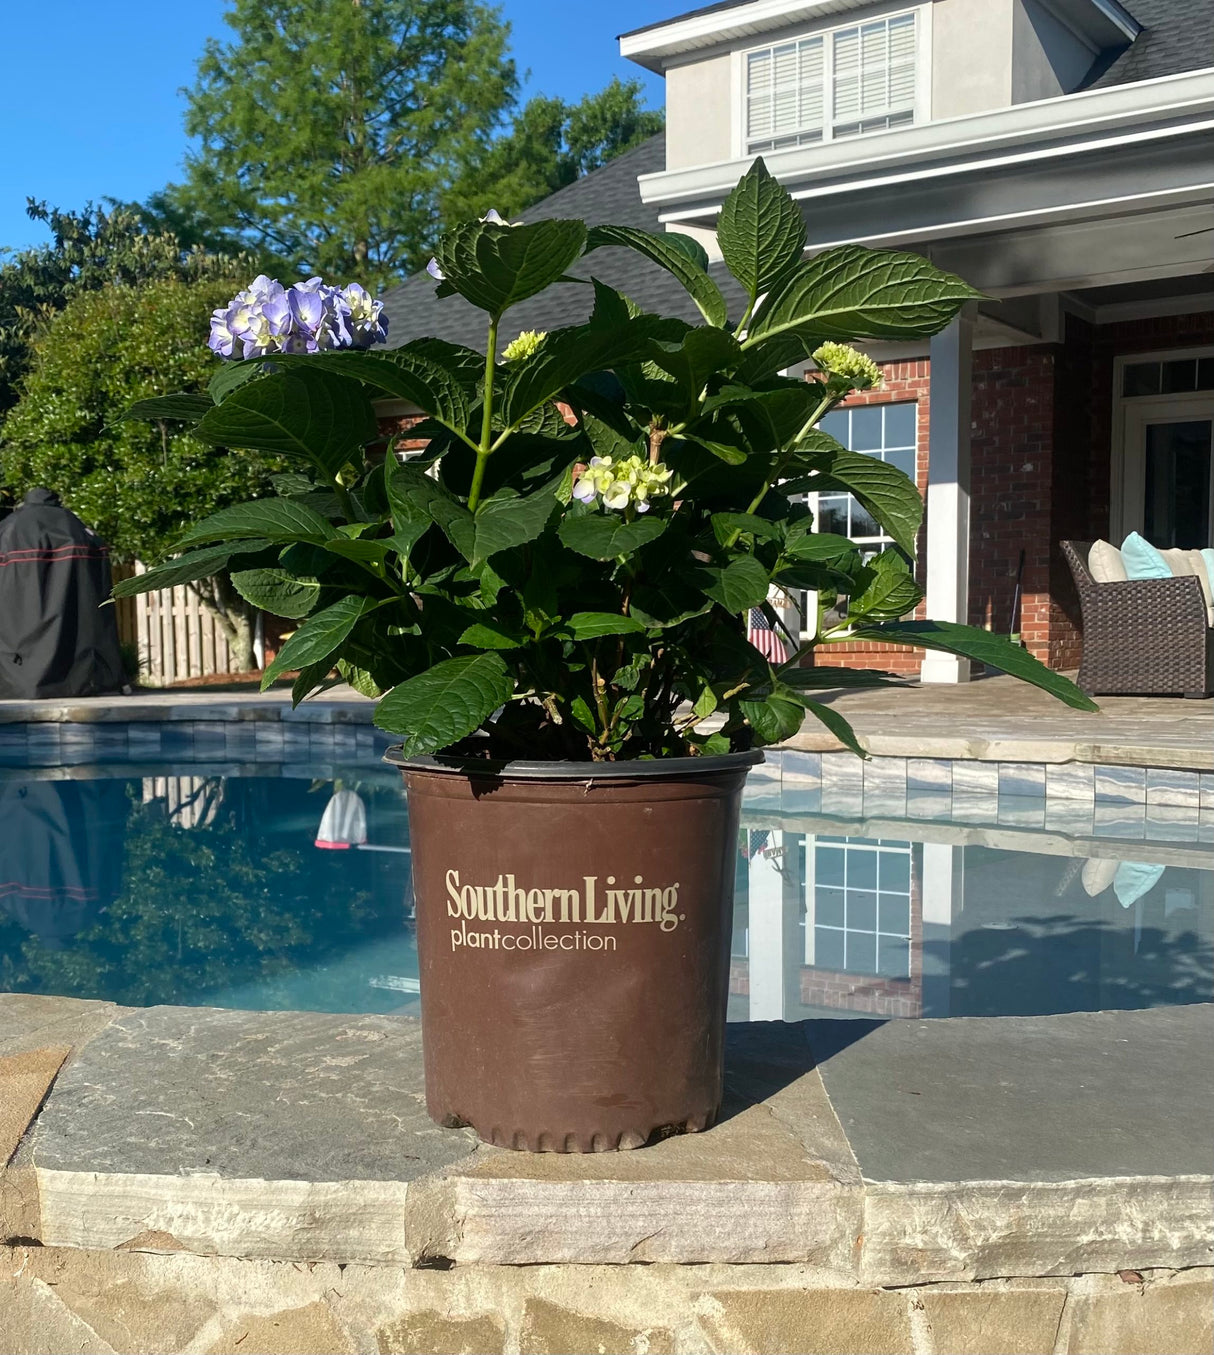 Dear Dolores hydrangea in a southern living plant collection pot on the stone edge of a pool in front of a house